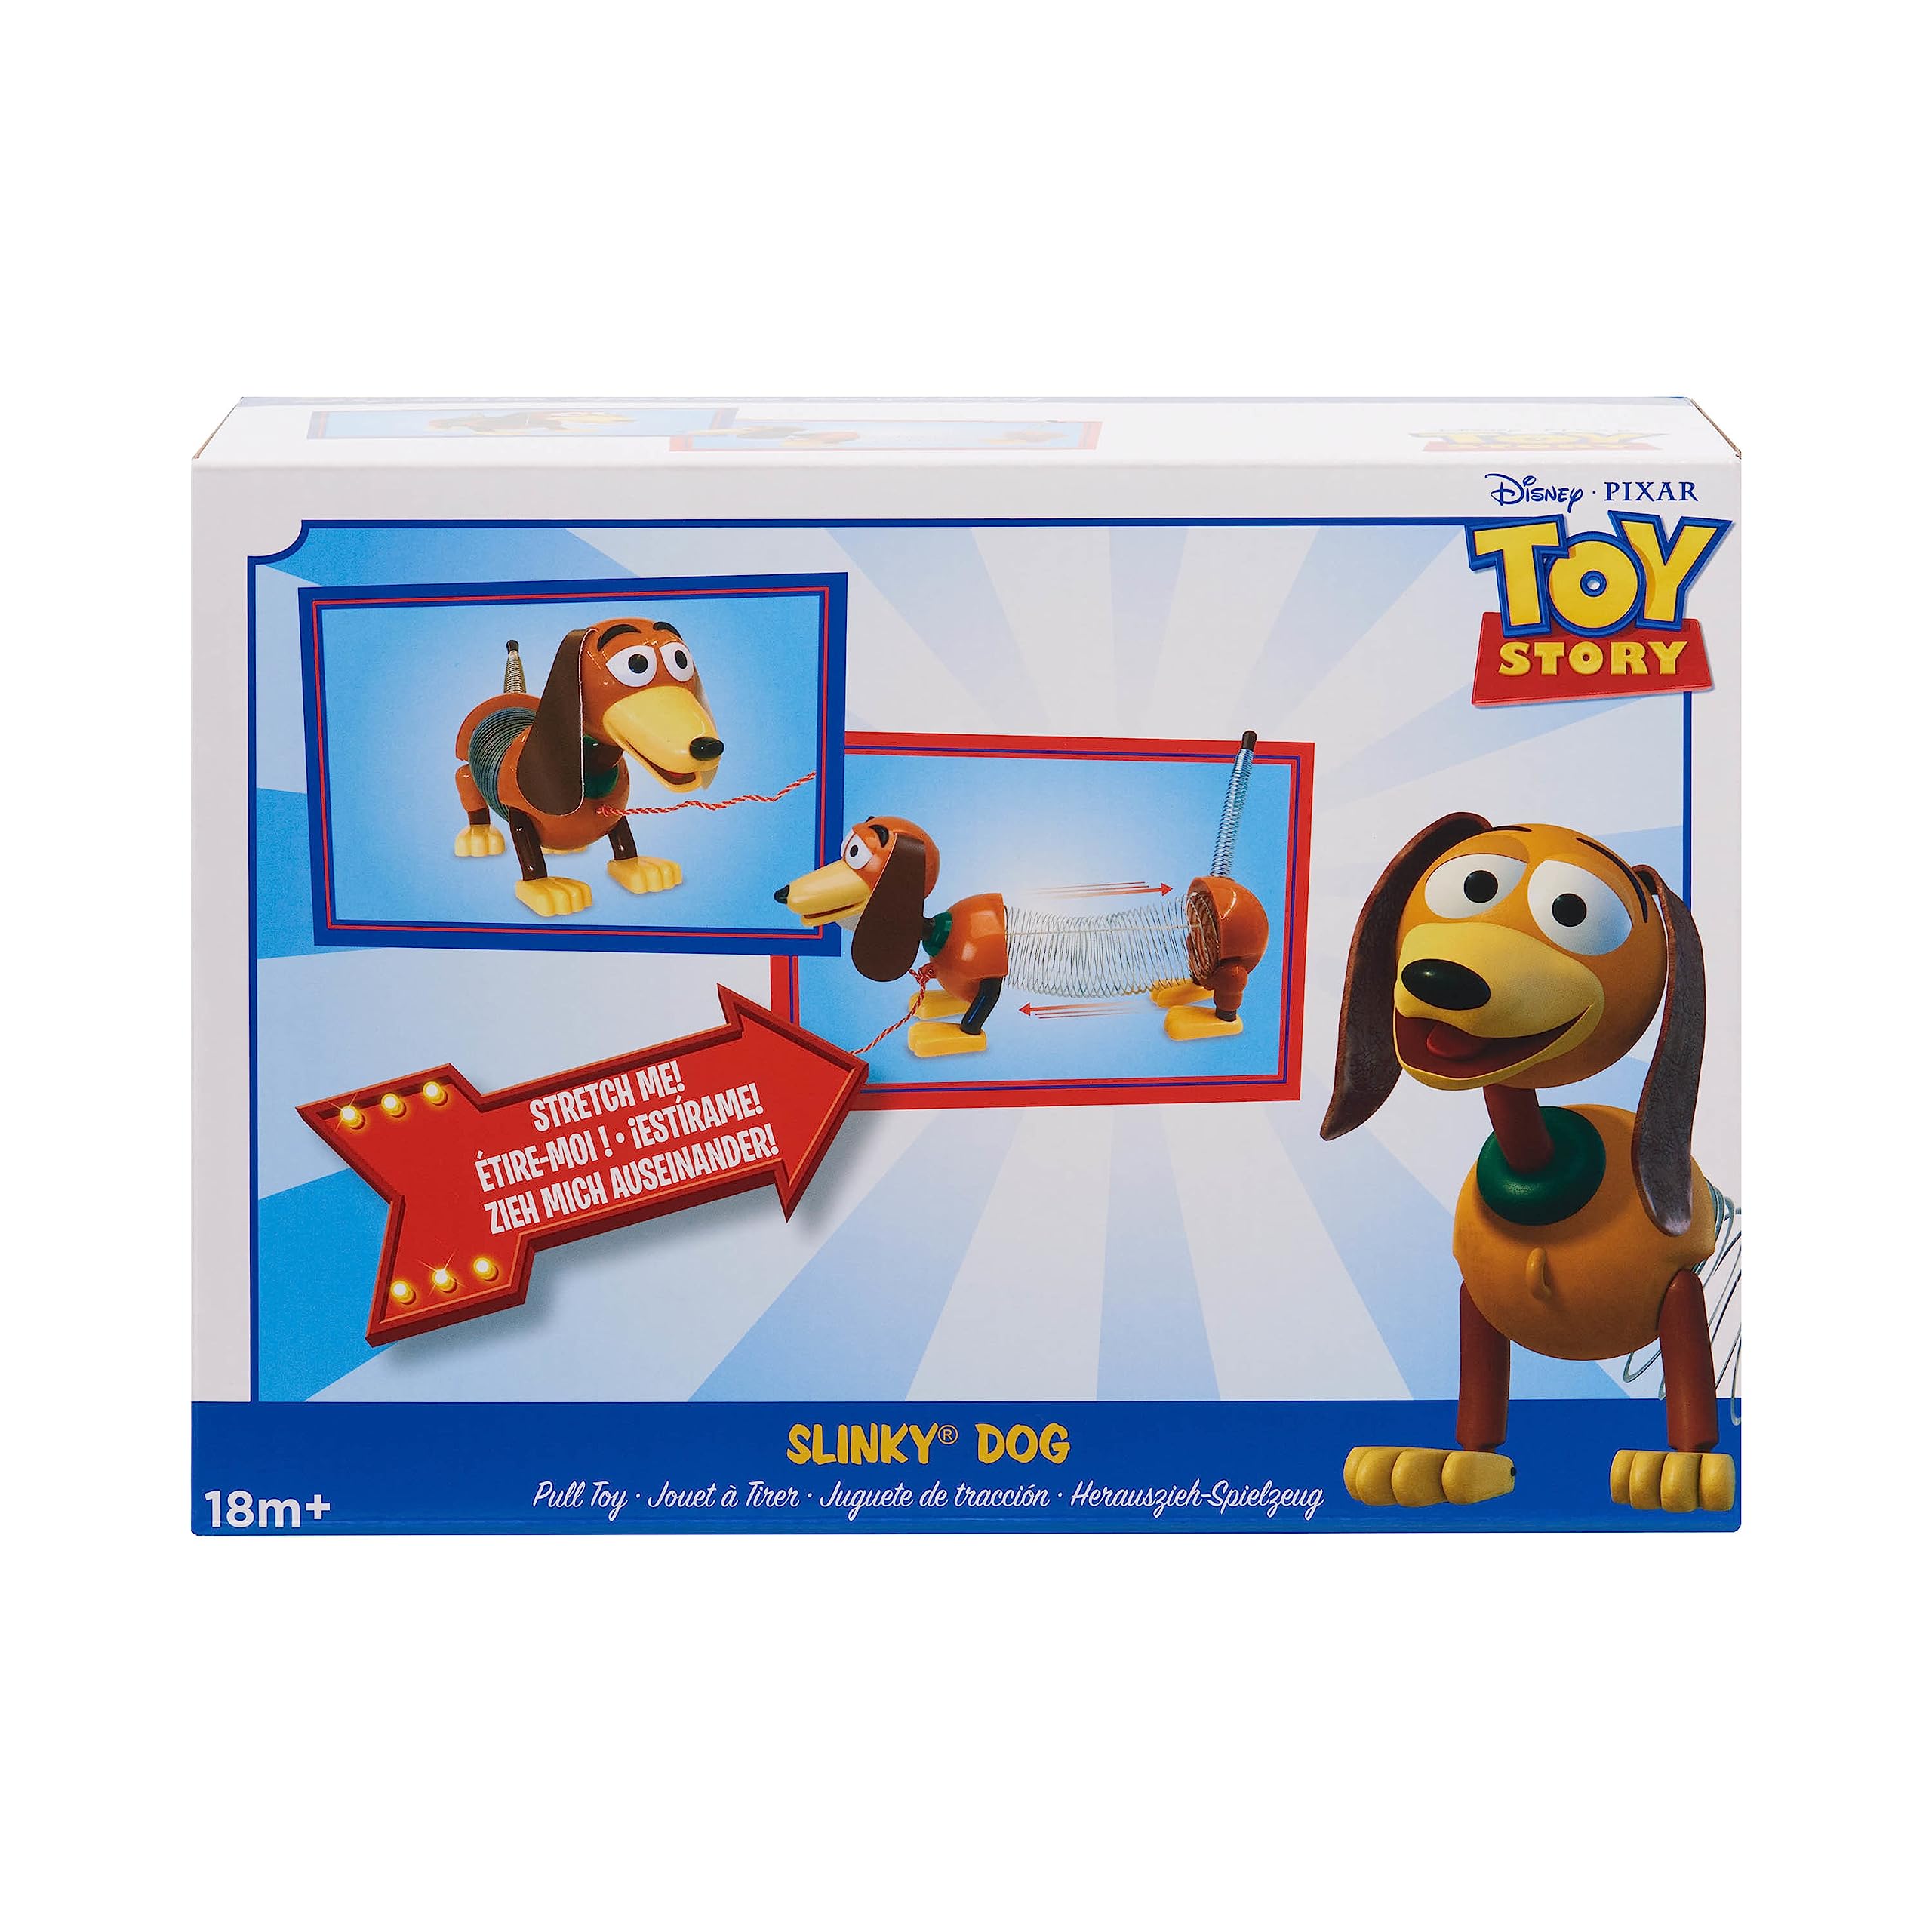 Disney•Pixar's Toy Story Slinky Dog Pull Toy, Walking Spring Toy for Boys and Girls, Officially Licensed Kids Toys for Ages 18 Month, Gifts and Presents by Just Play